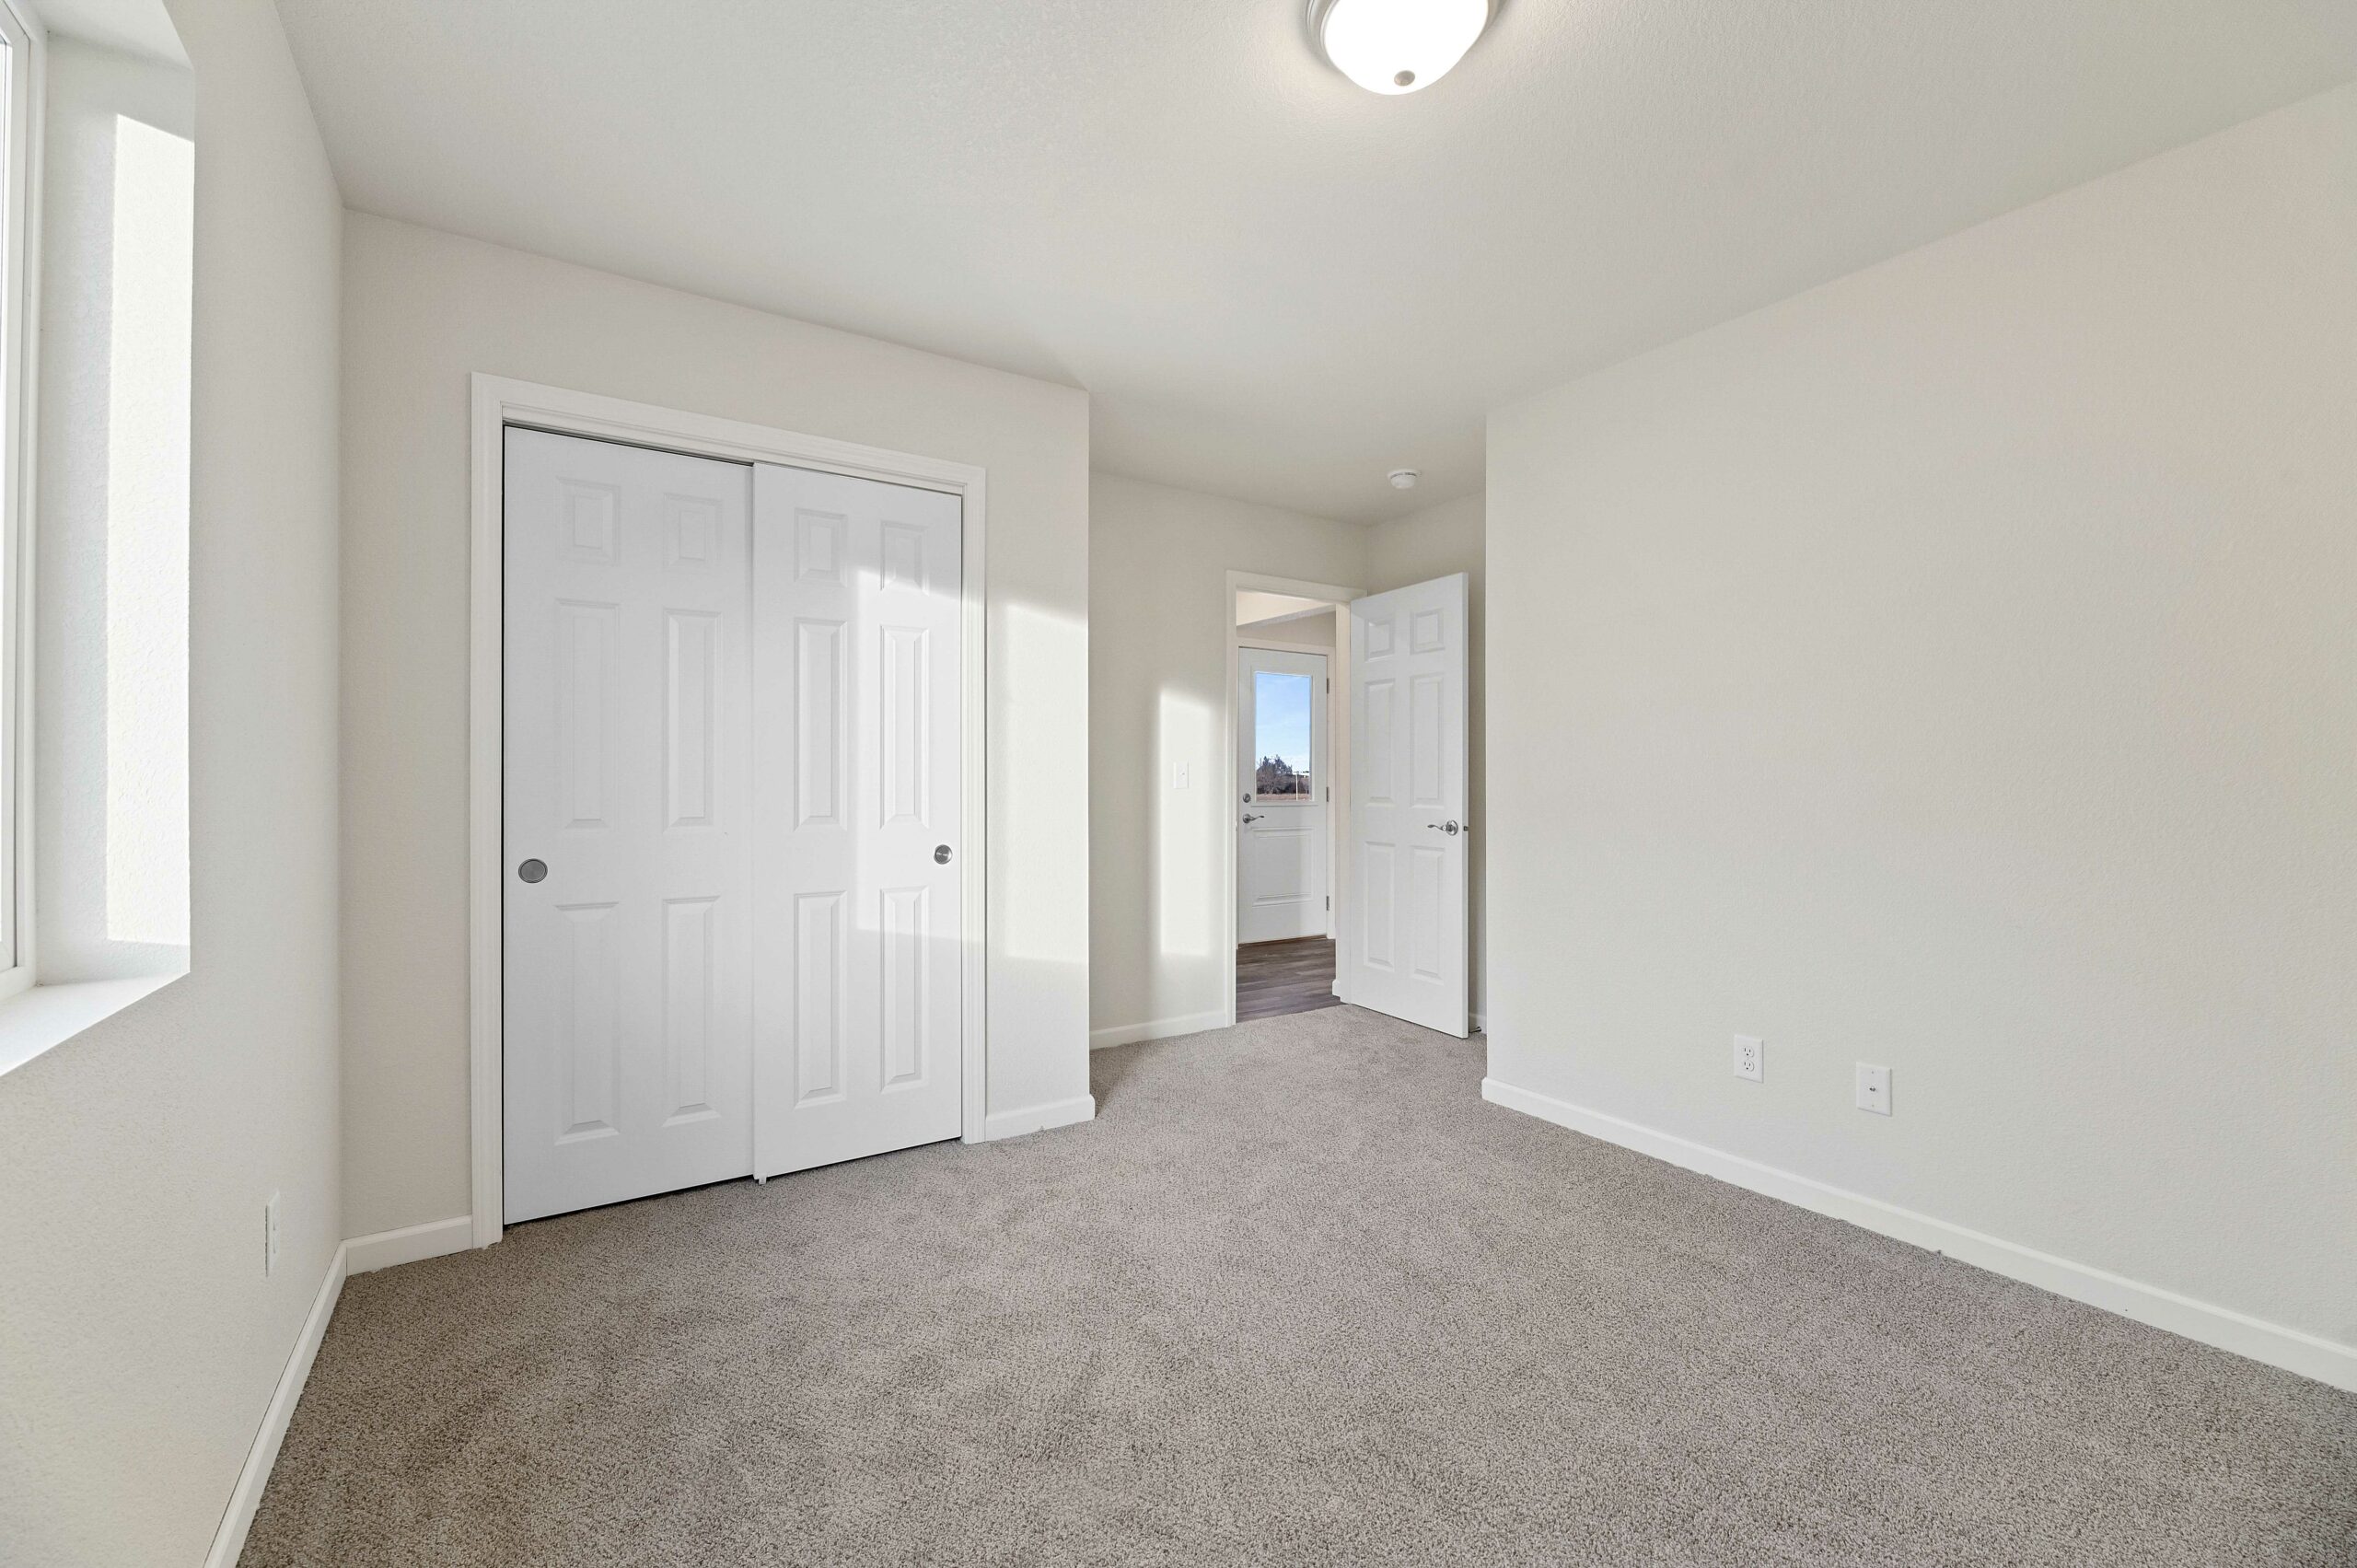 inside of an empty bedroom in a brand new home